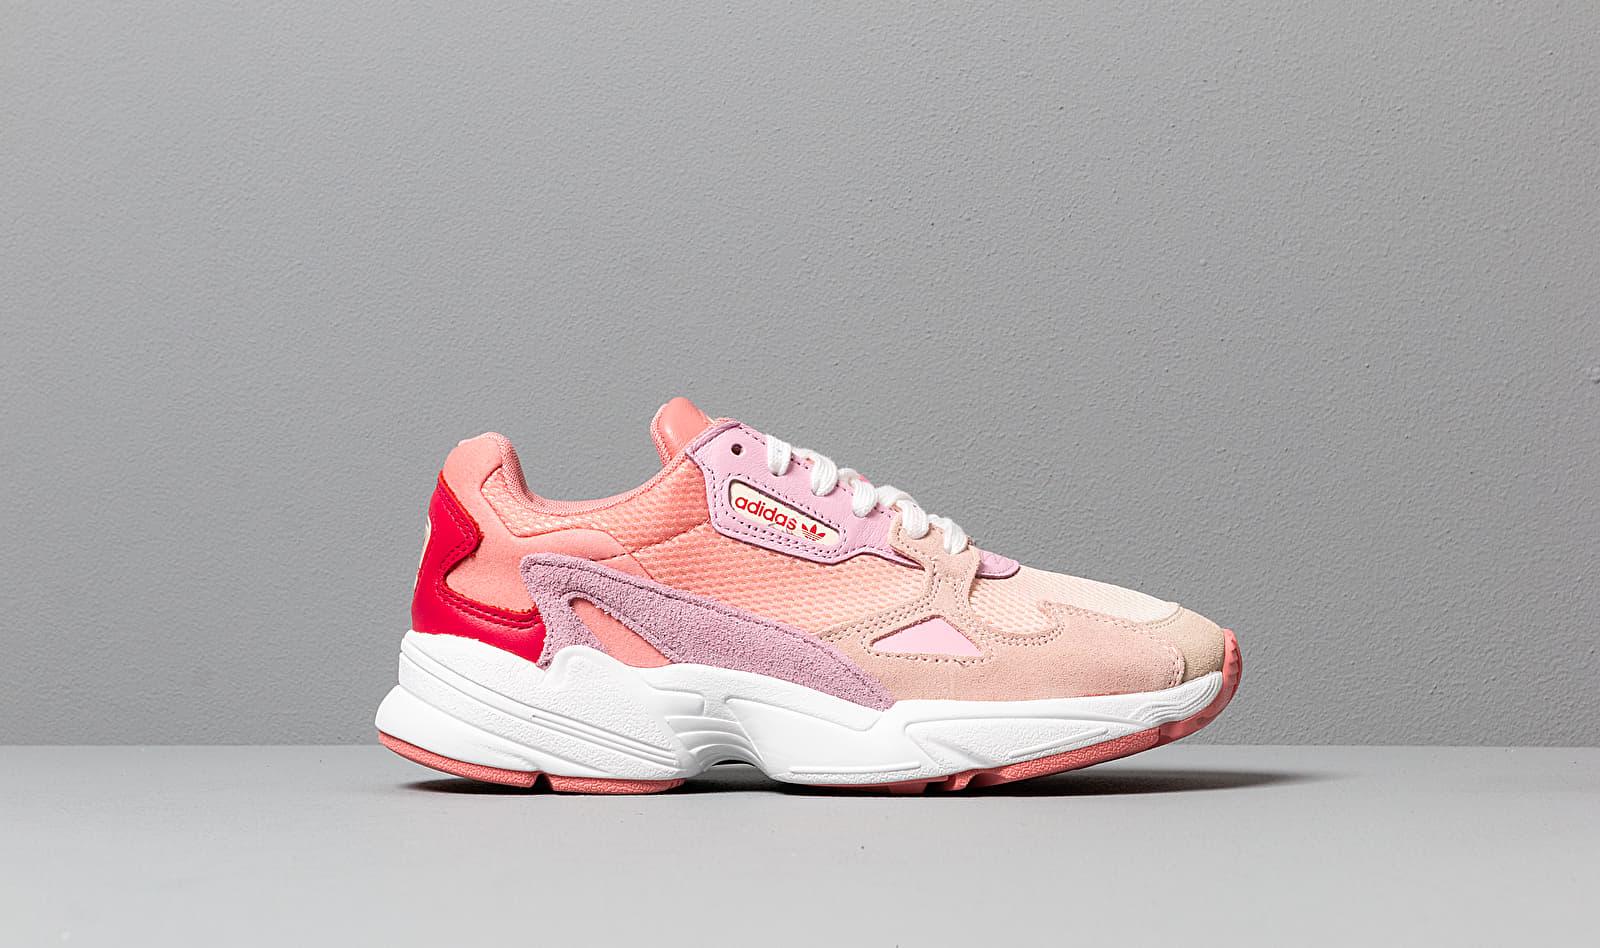 adidas Originals Leather Falcon in Peach/Peach (Pink) - Save 57% | Lyst